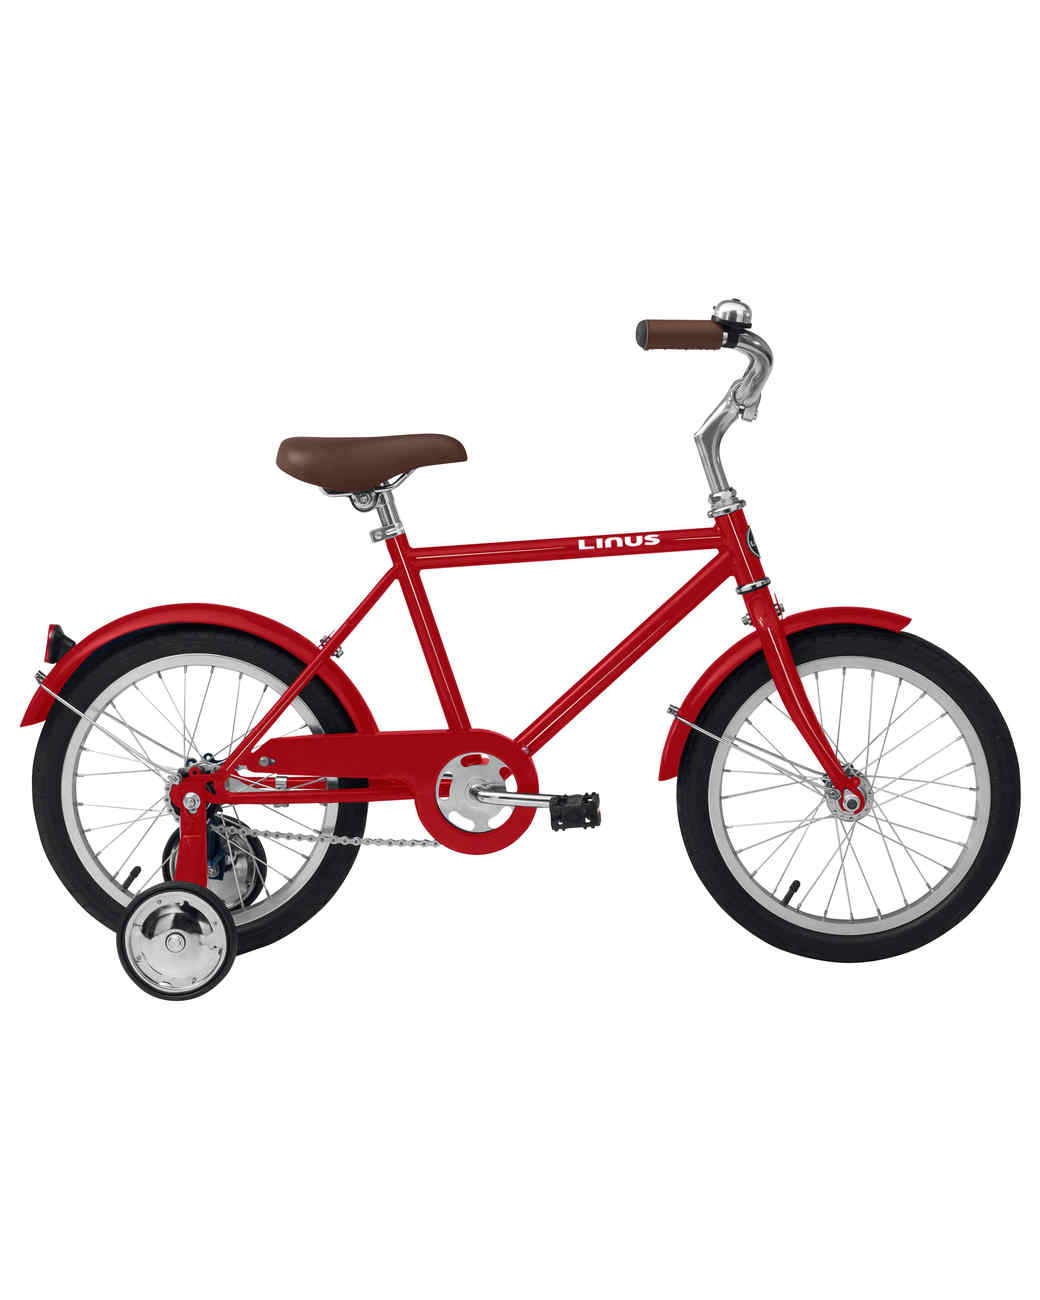 red lil roadster bike with training wheels